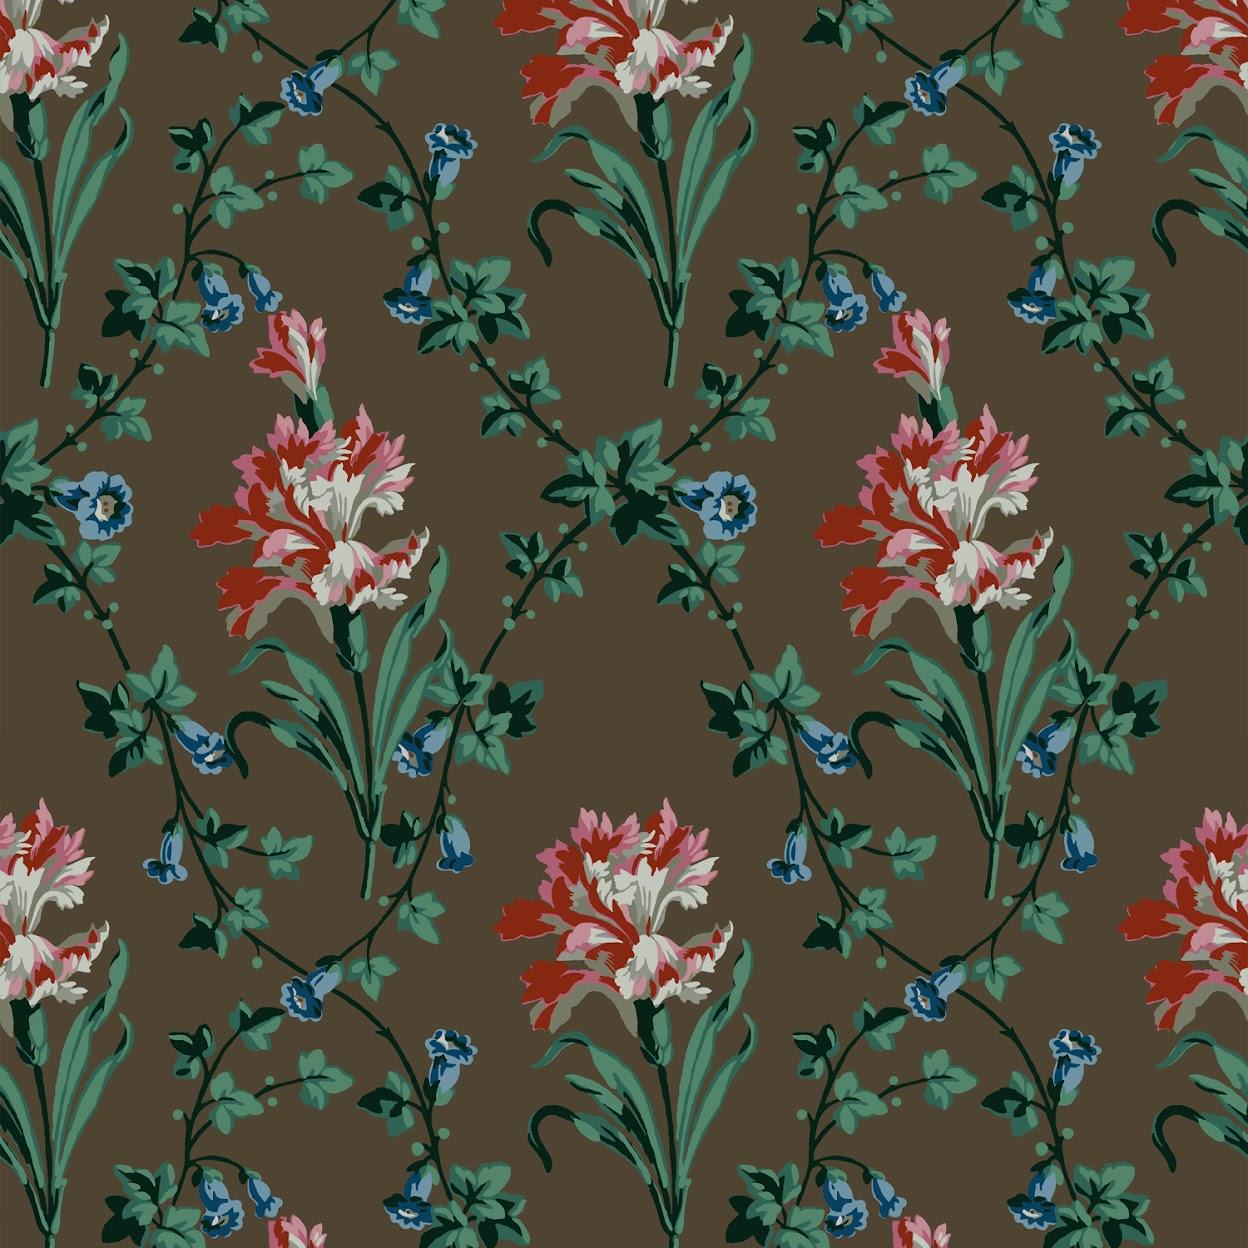 Repeat: 50,9 cm / 20 in

Founded in 2019, the French wallpaper brand Papier Francais is defined by the rediscovery, restoration, and revival of iconic wallpapers dating back to the French “Golden Age of wallpaper” of the 18th and 19th centuries.